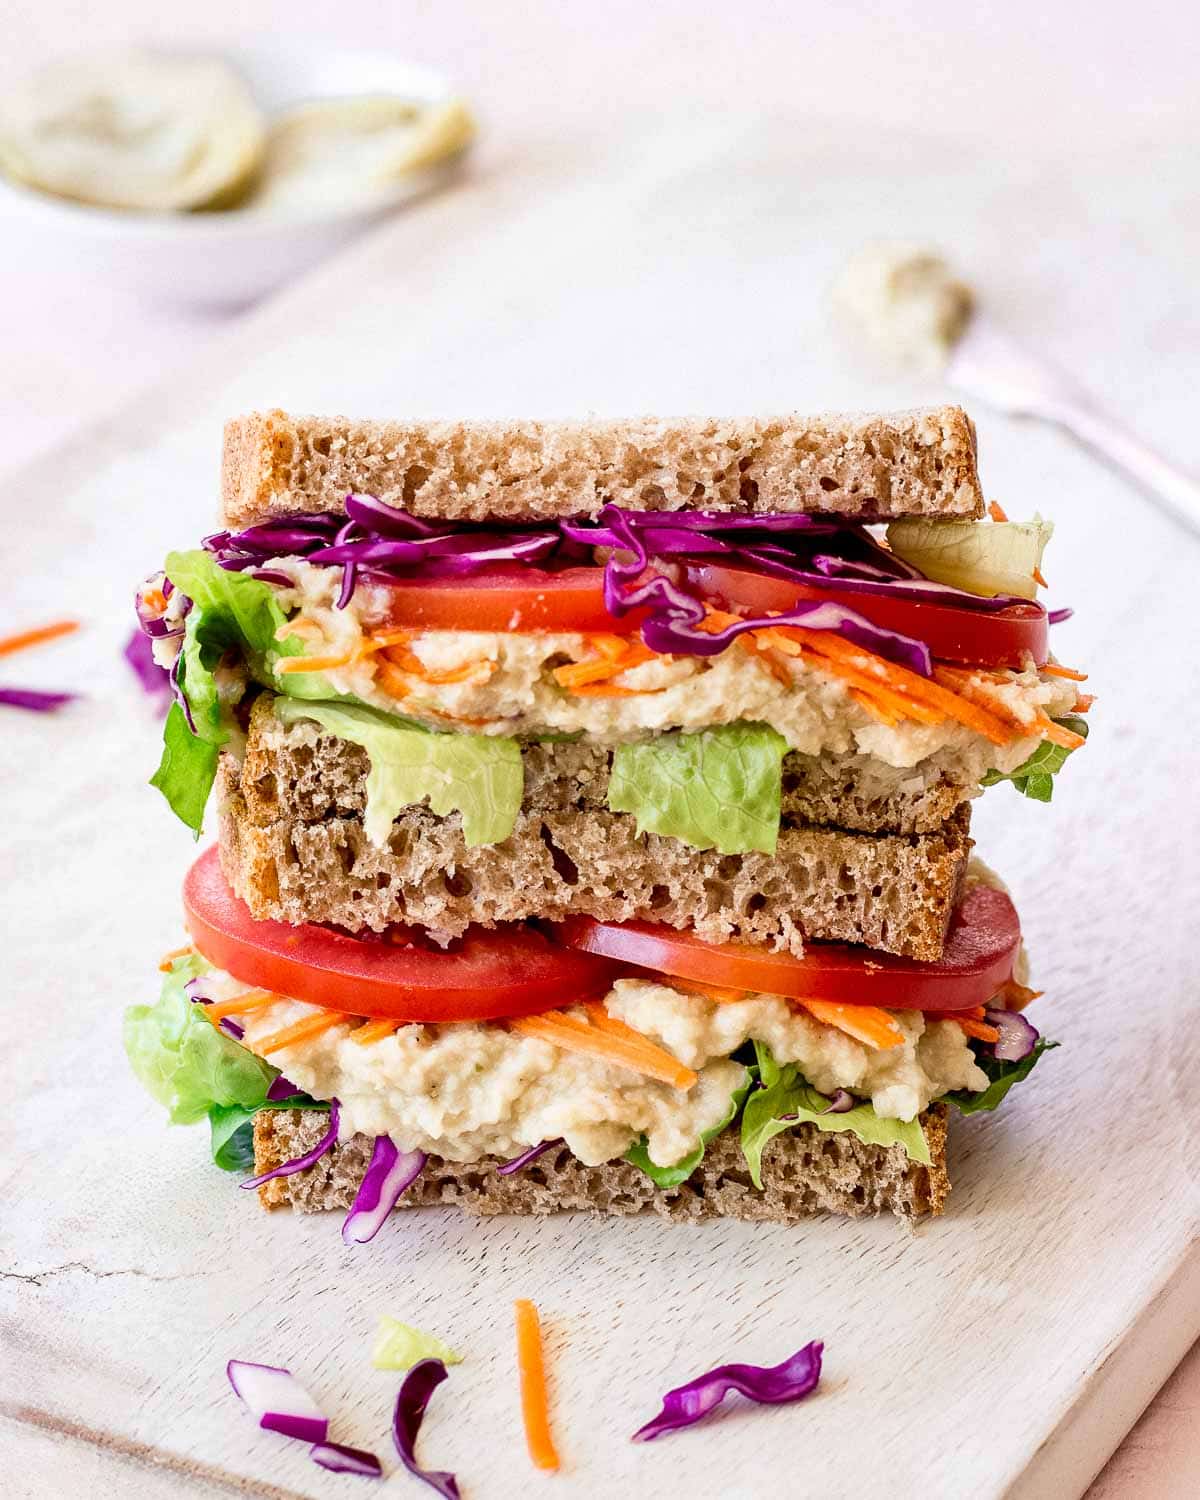 Colourful vegan sandwich with artichoke and white bean, tomatoes, lettuce and red cabbage spread on a white chopping board.